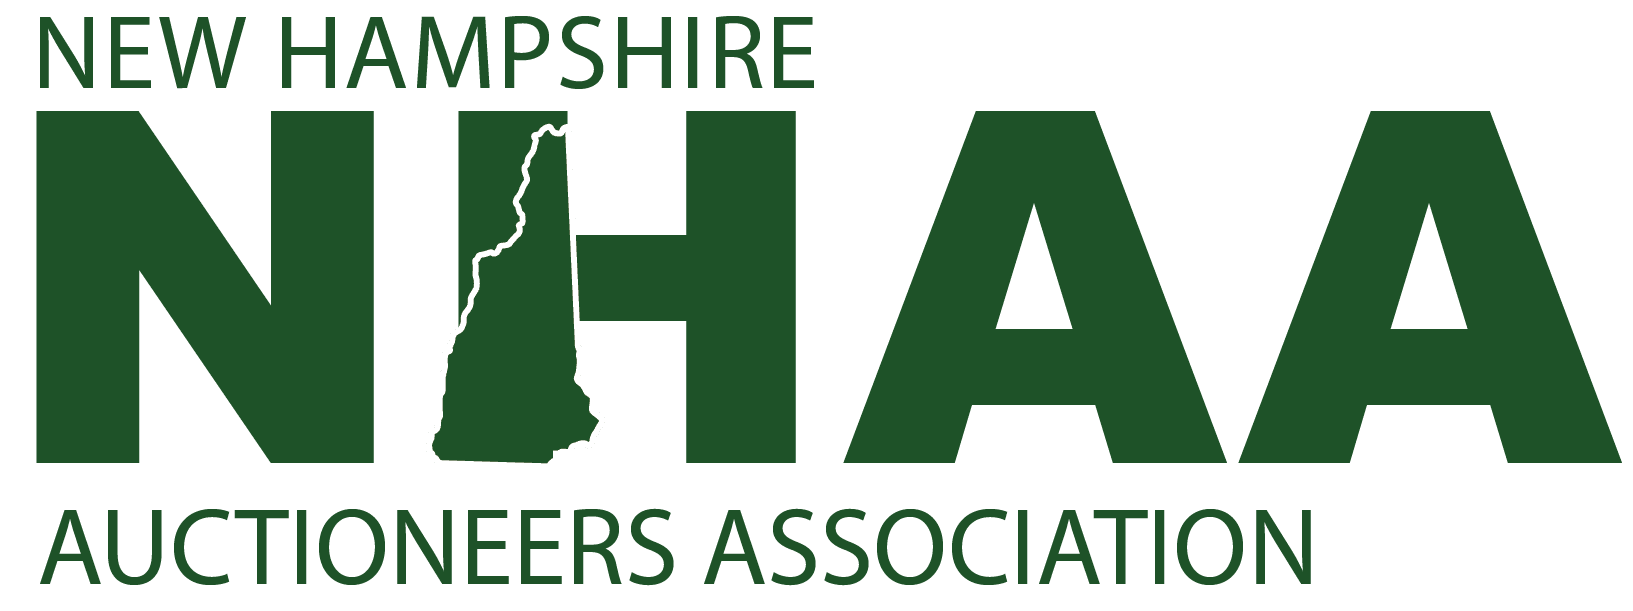 New Hampshire Auctioneers Association Logo